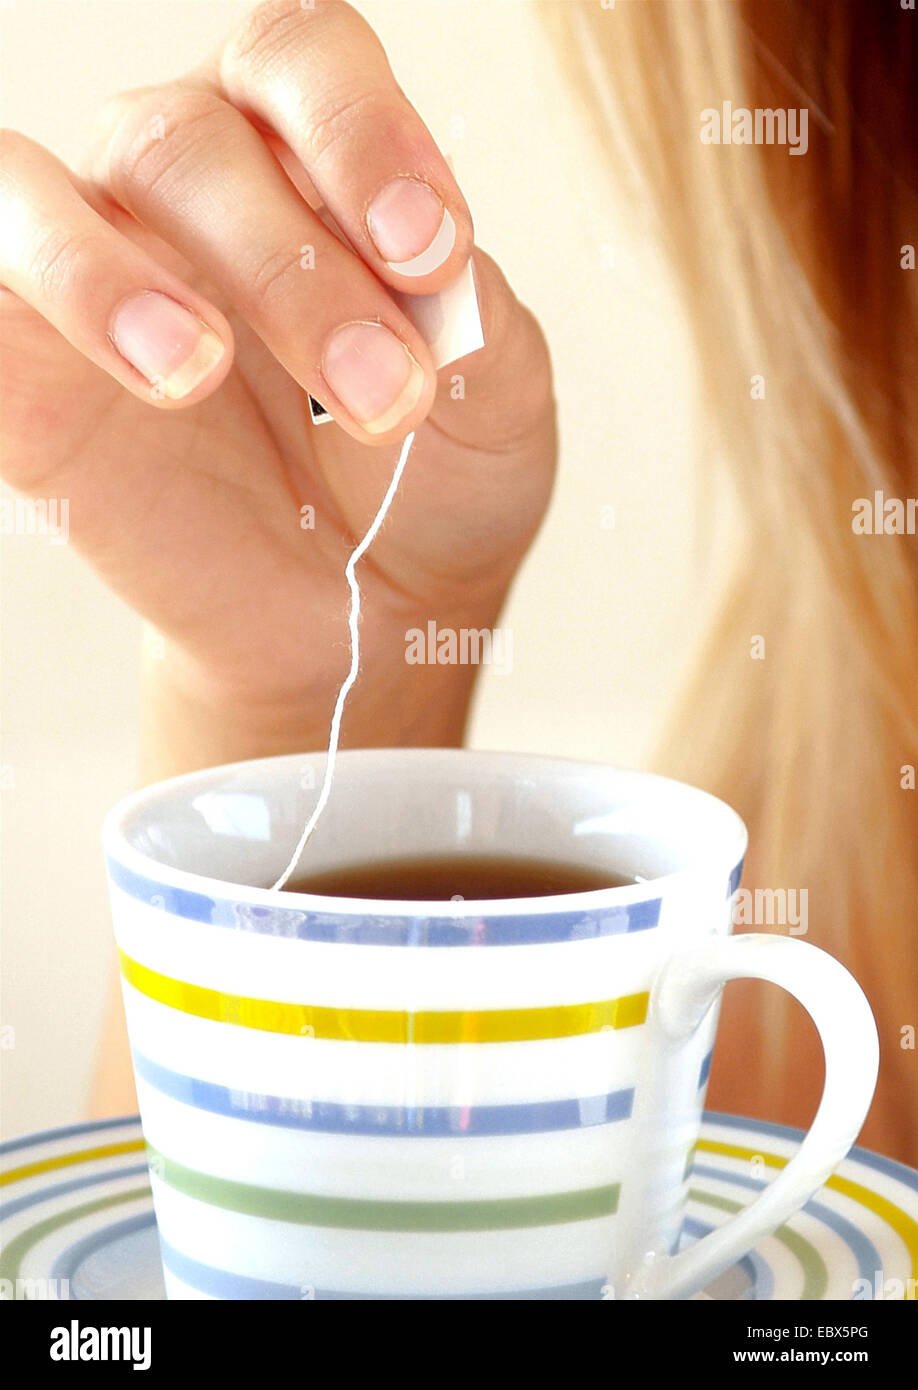 long-haired blond young woman dipping a tea bag into a cup Stock Photo